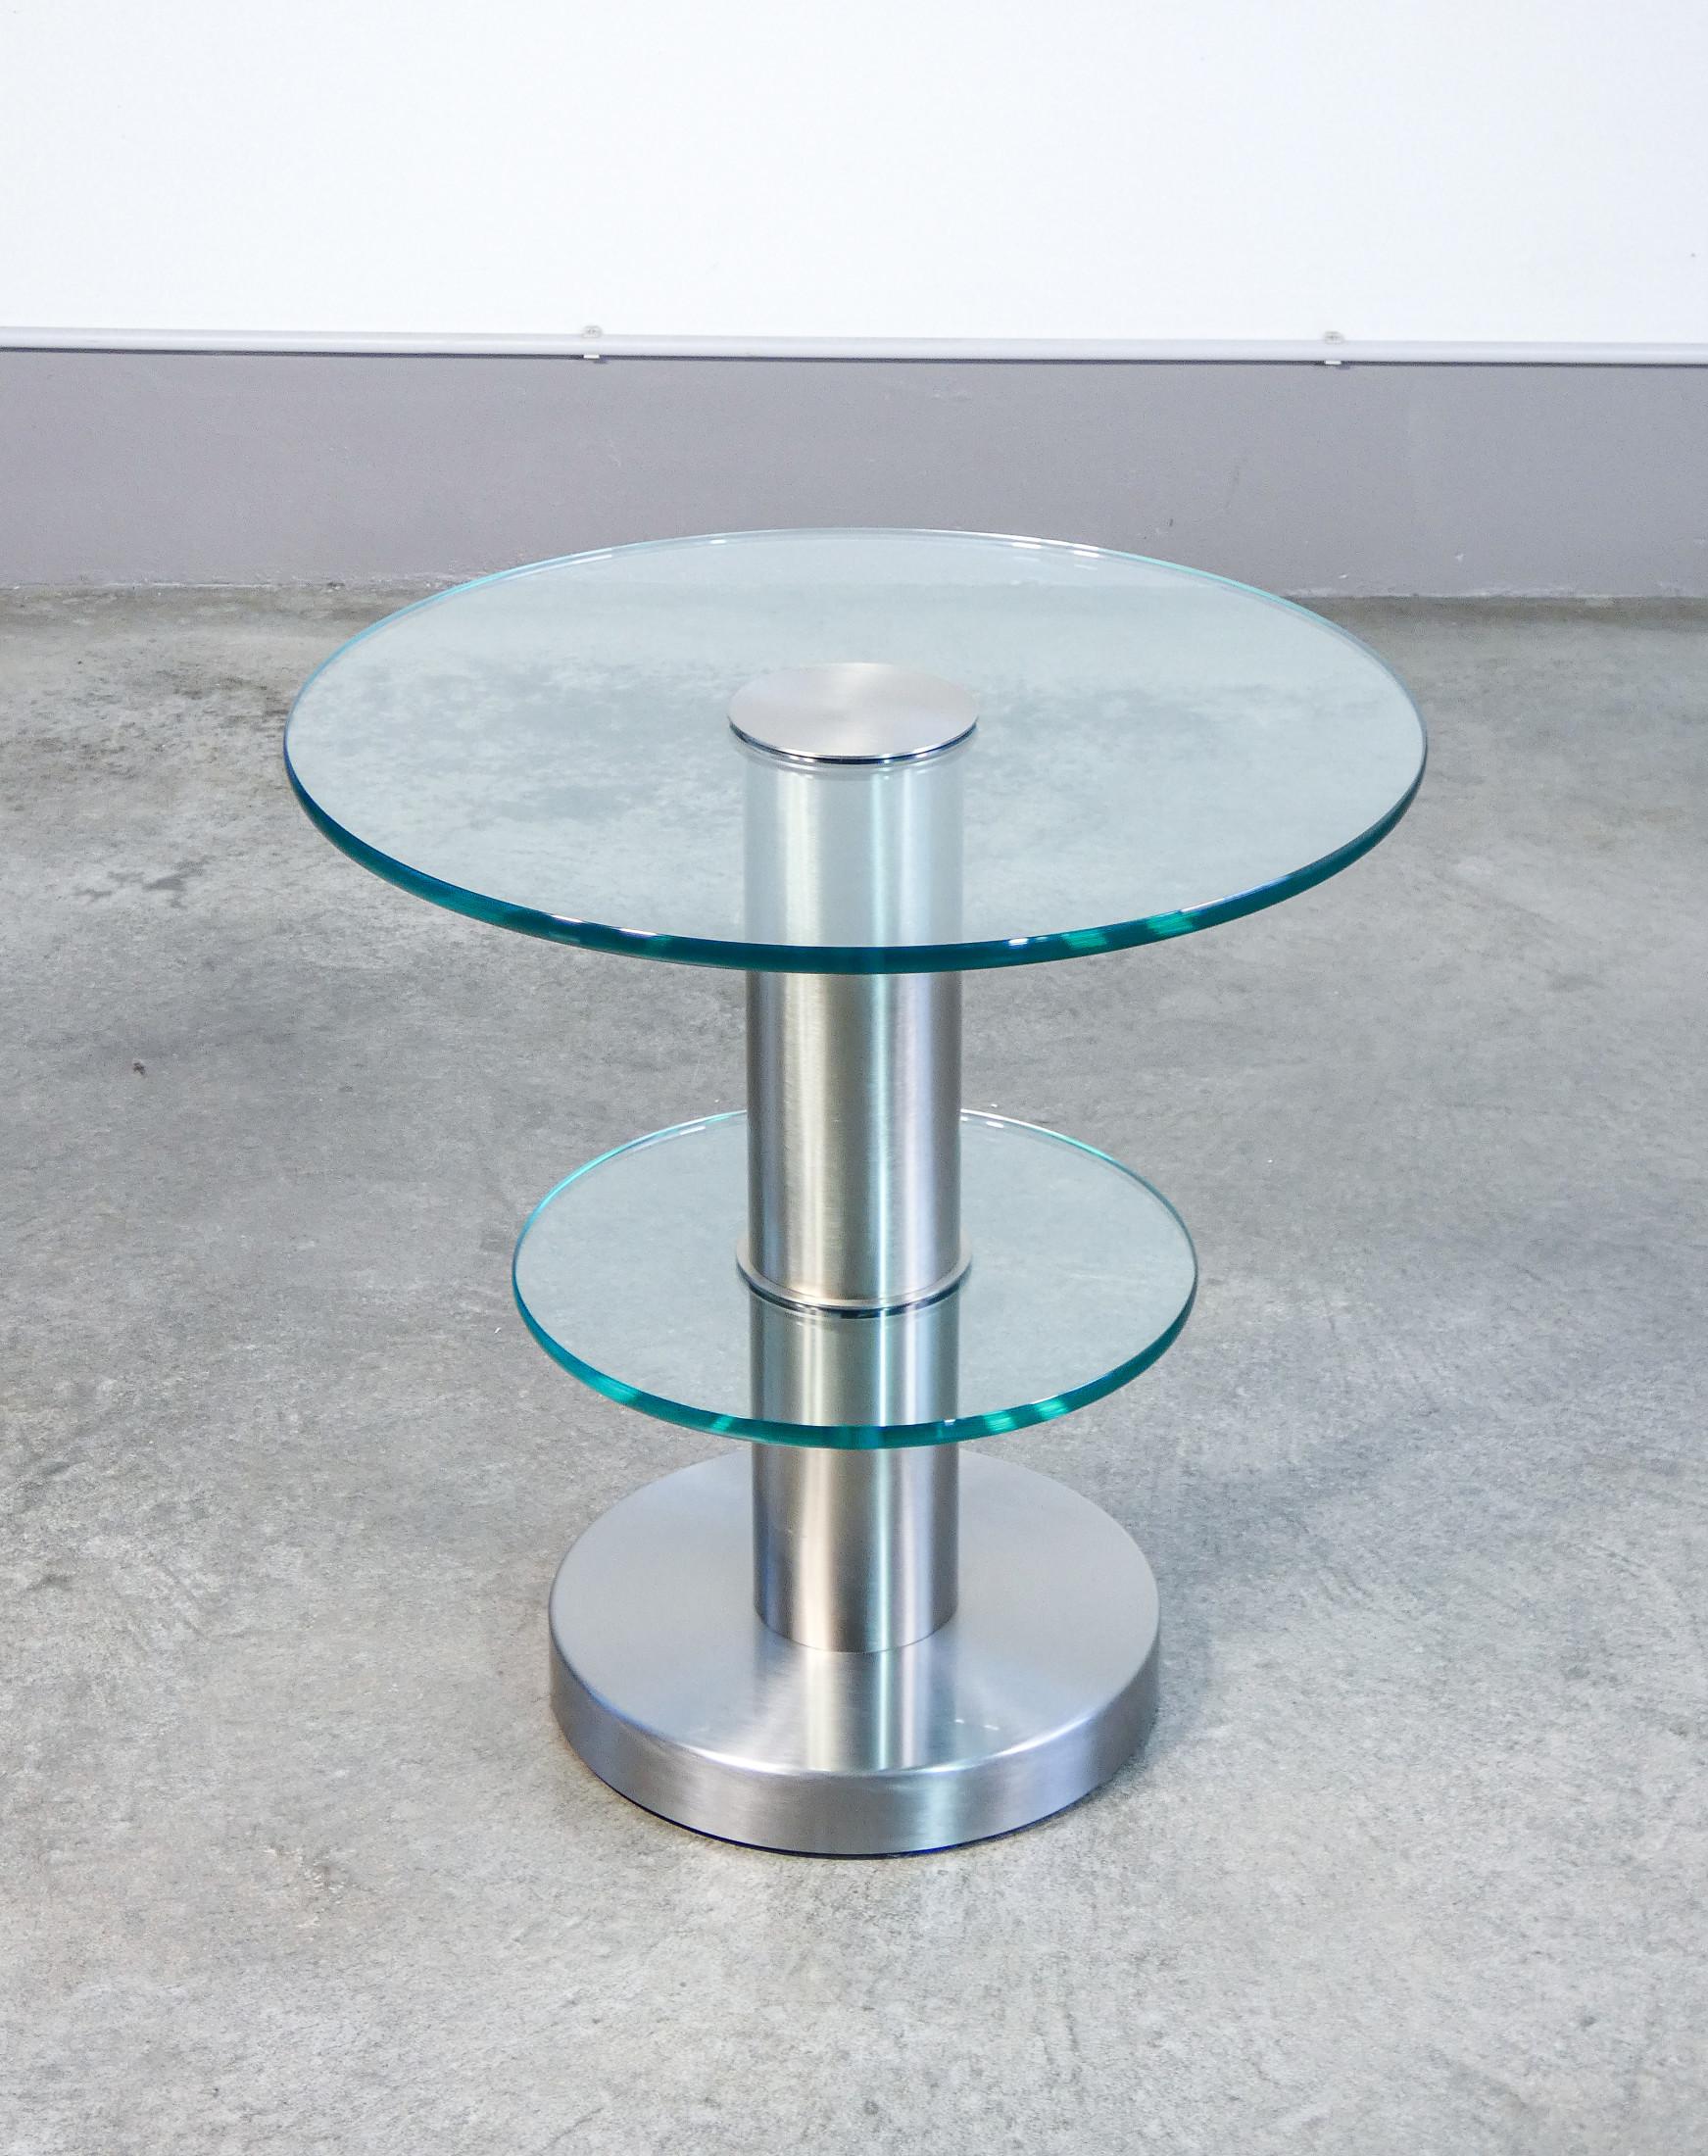 Side table mod. 1932
design by Giò PONTI
for FONTANA ARTE.

ORIGIN
Italy

DESIGNER
Gio PONTI
(1891-1979) was an influential Italian architect and designer, among the best known on the Italian and world stage. He graduated in architecture from the